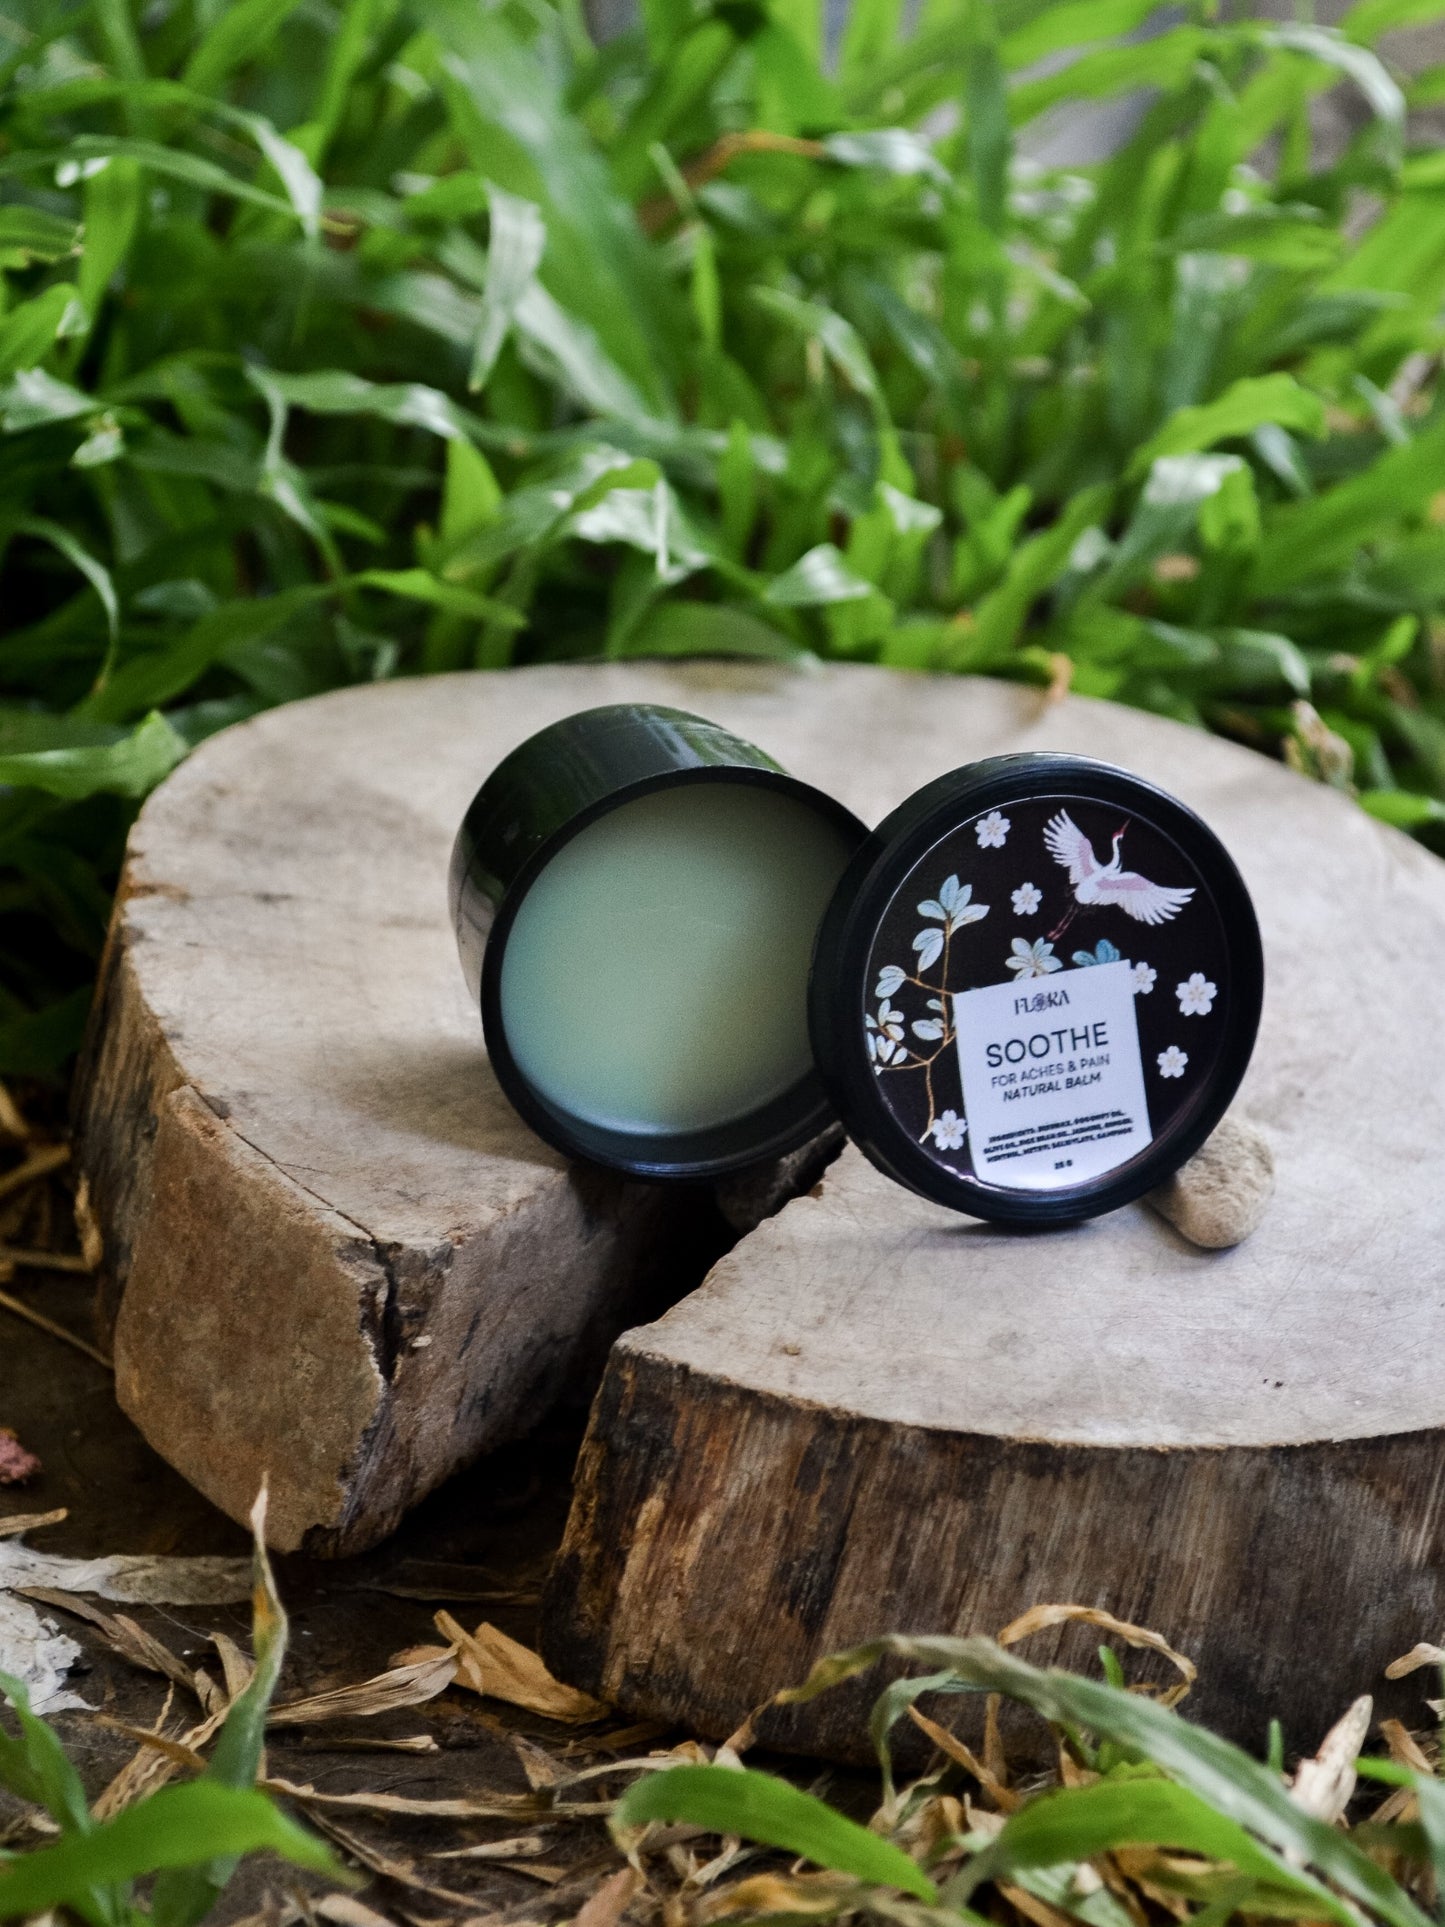 Soothe Natural Skin Balm (for pain & aches)